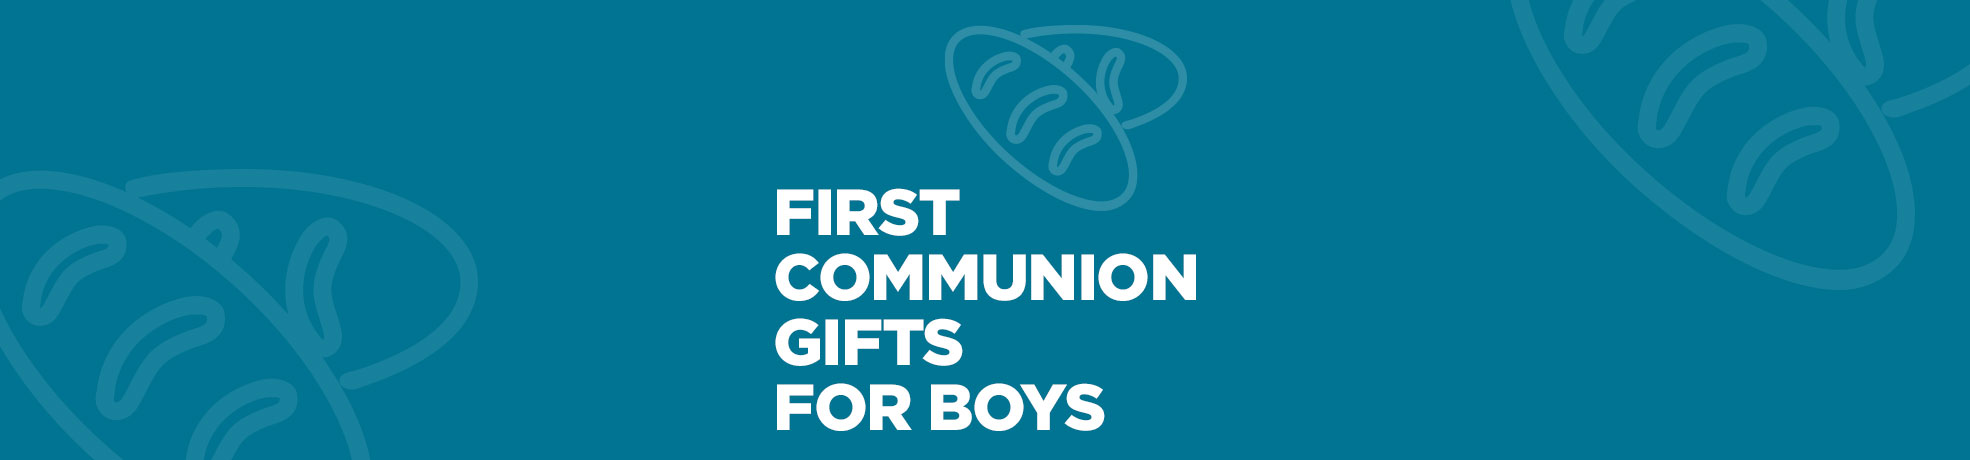 First Communion Gift Ideas for Boys